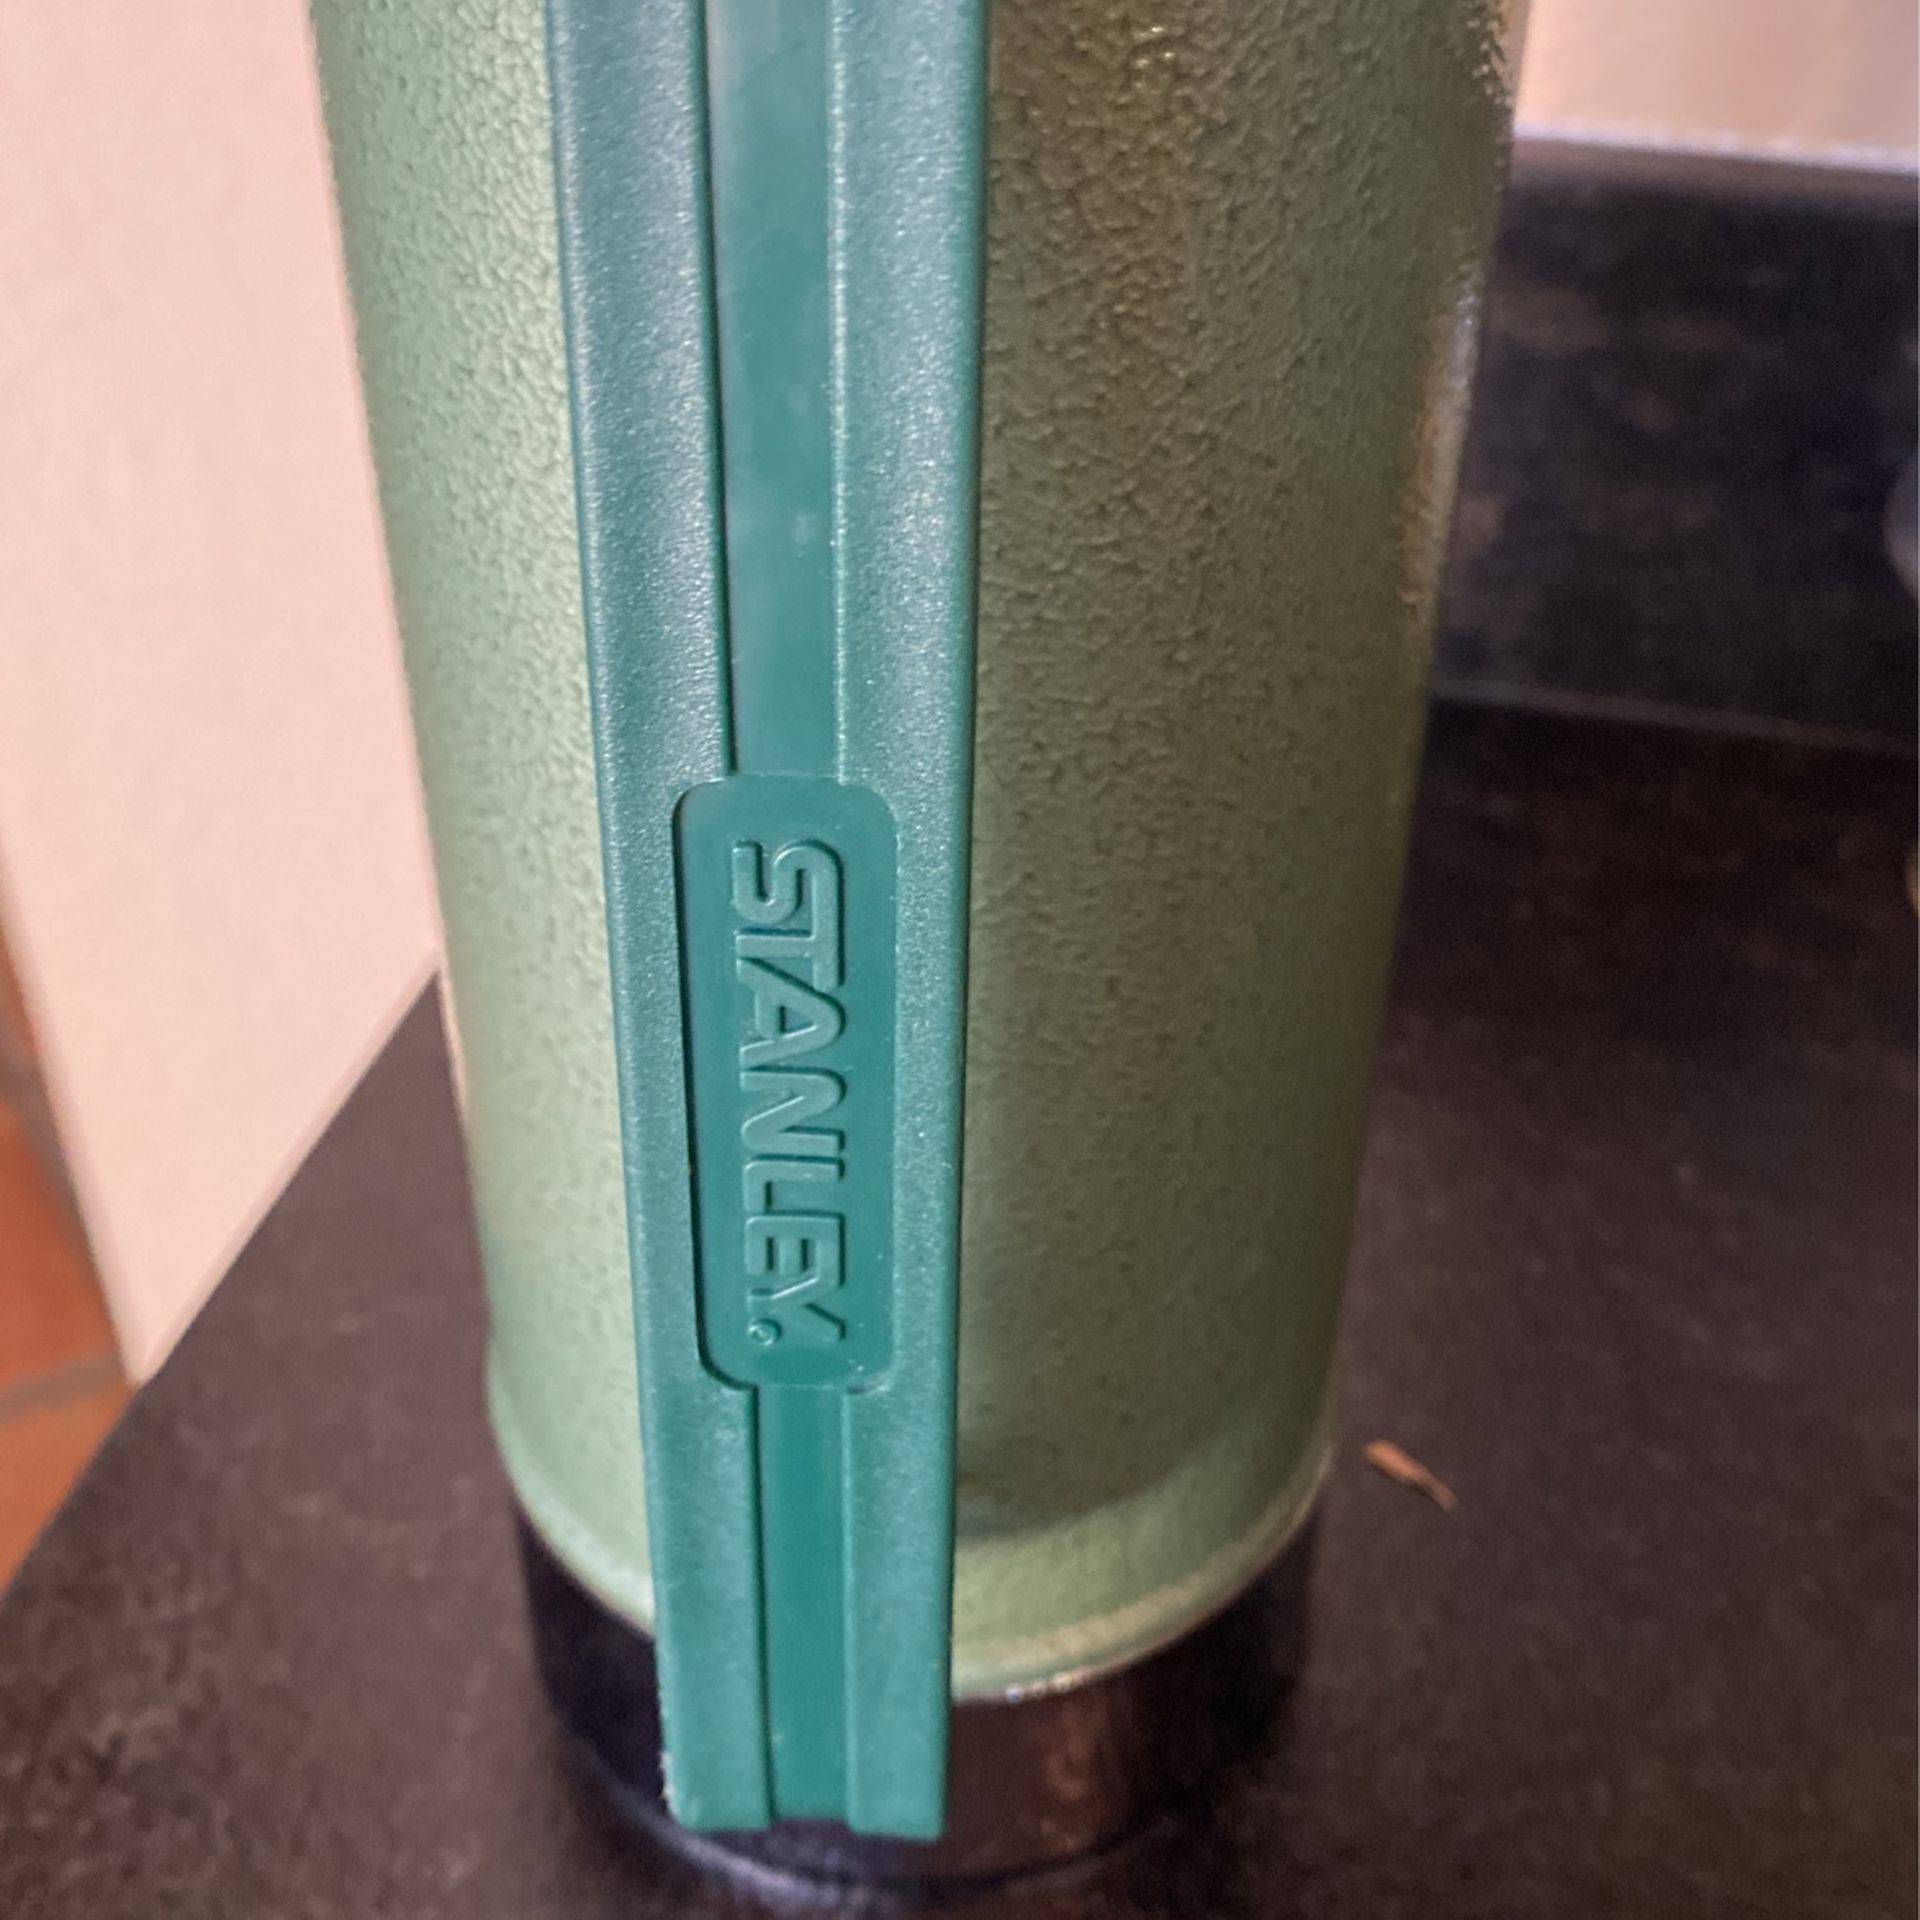 Stanley Vintage Stainless Steel Thermal Water Cooler for Sale in Laveen  Village, AZ - OfferUp